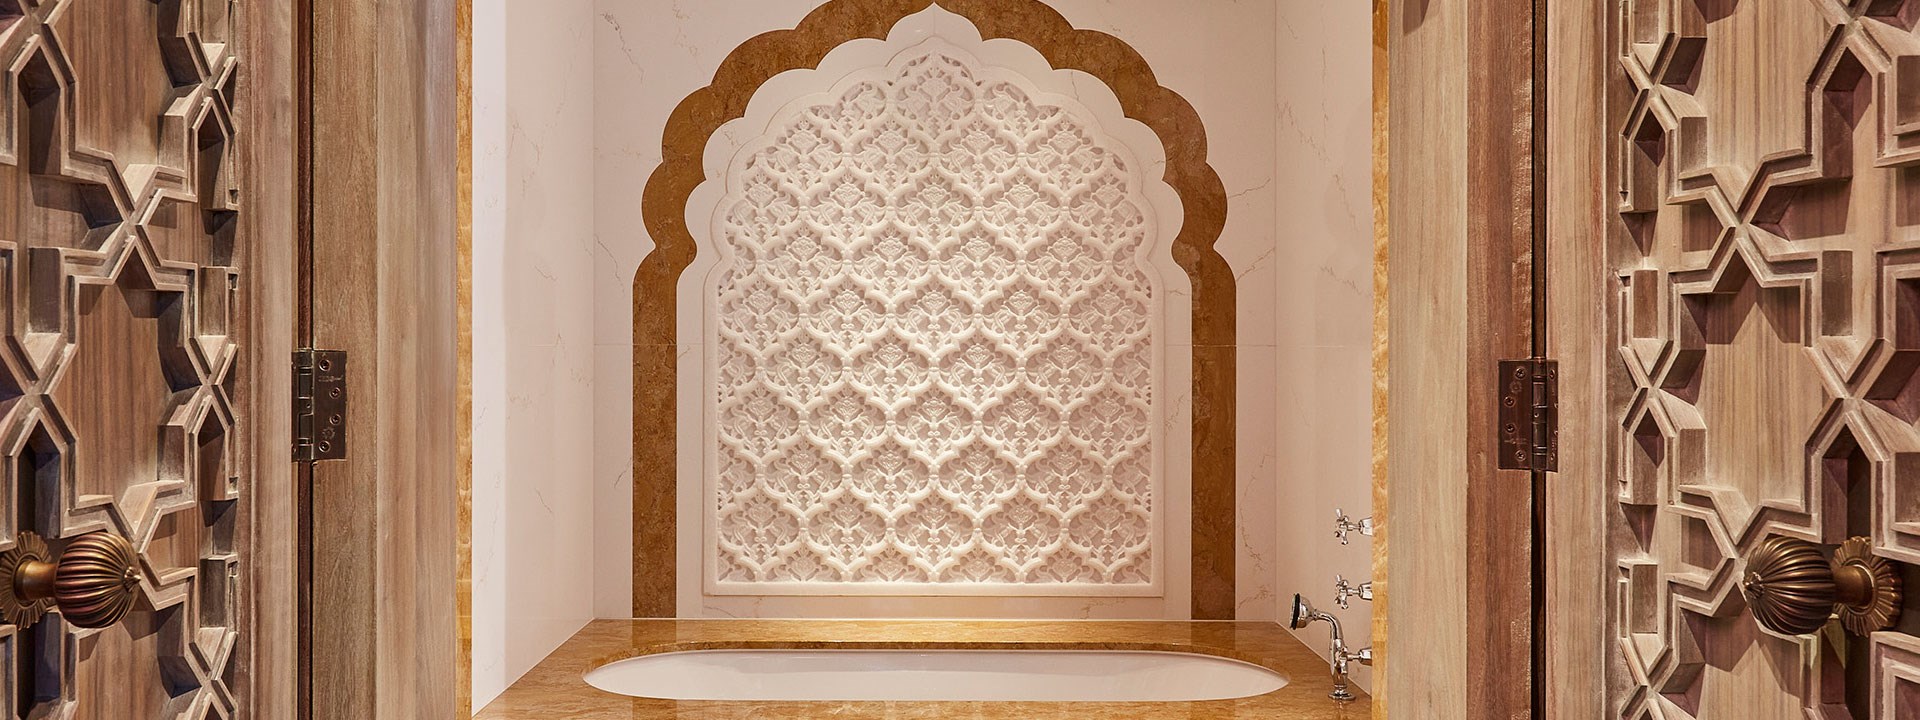 Bathroom of The King's Lodge with scalloped detailing and a white decor